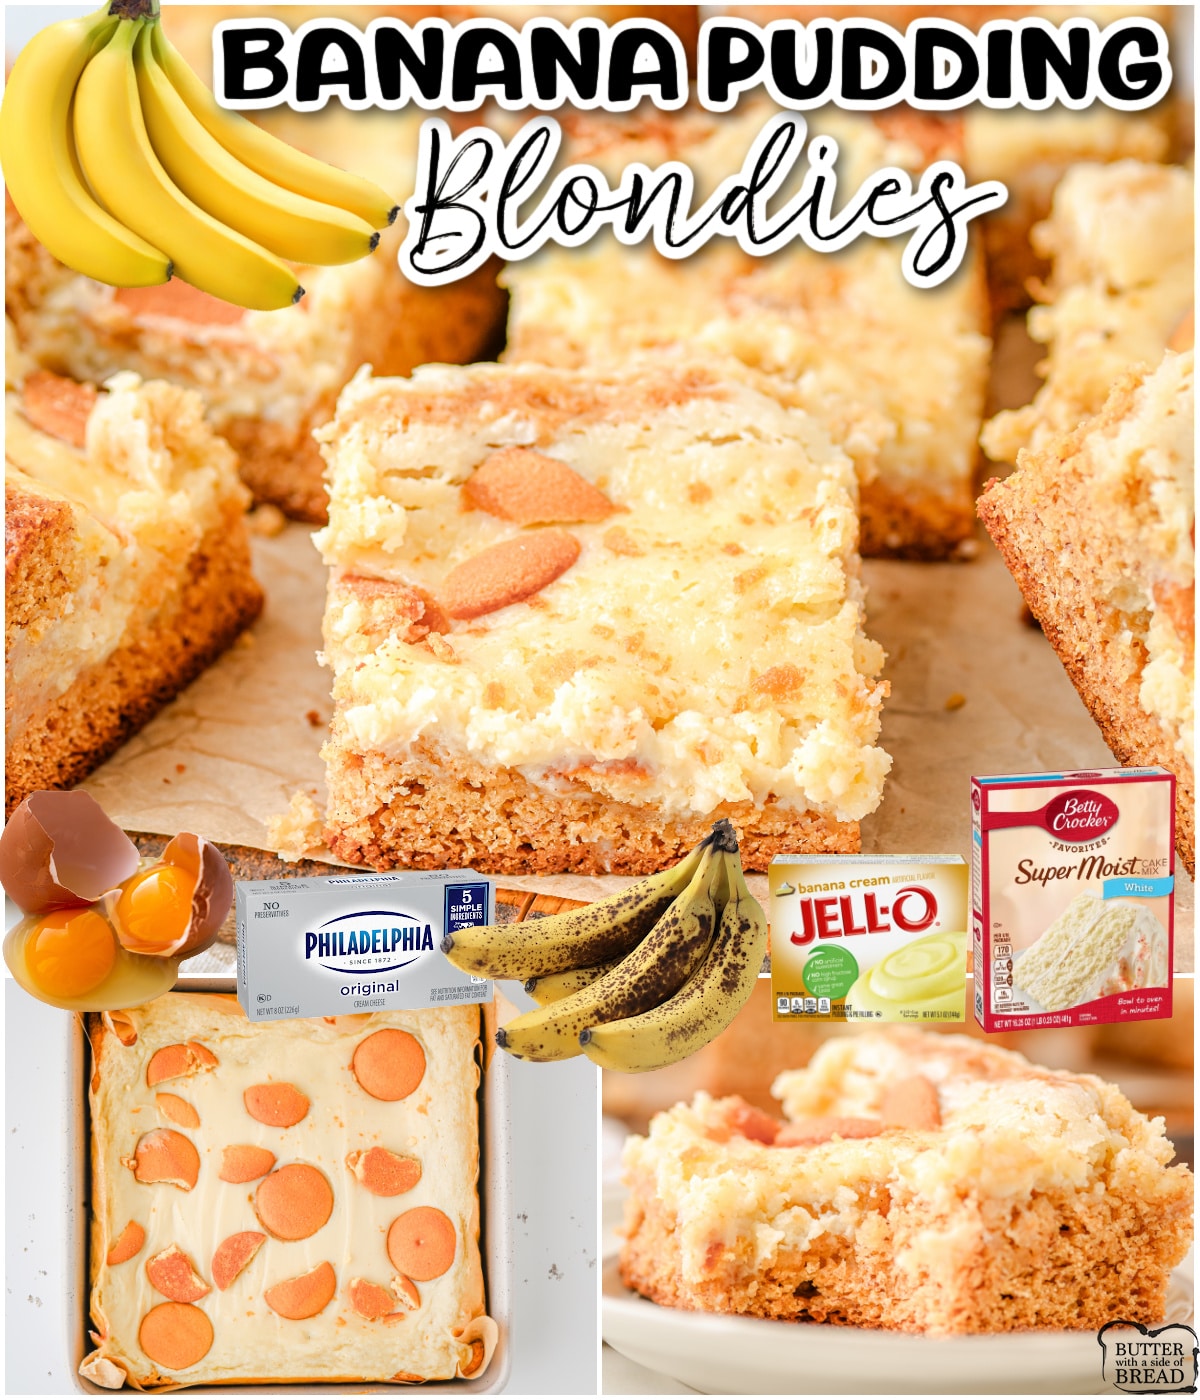 Banana Pudding Brownies are a delightful treat made with cake mix, banana pudding & a banana! These blonde brownies are baked with a sweetened cream cheese topping which compliments the banana flavor perfectly!